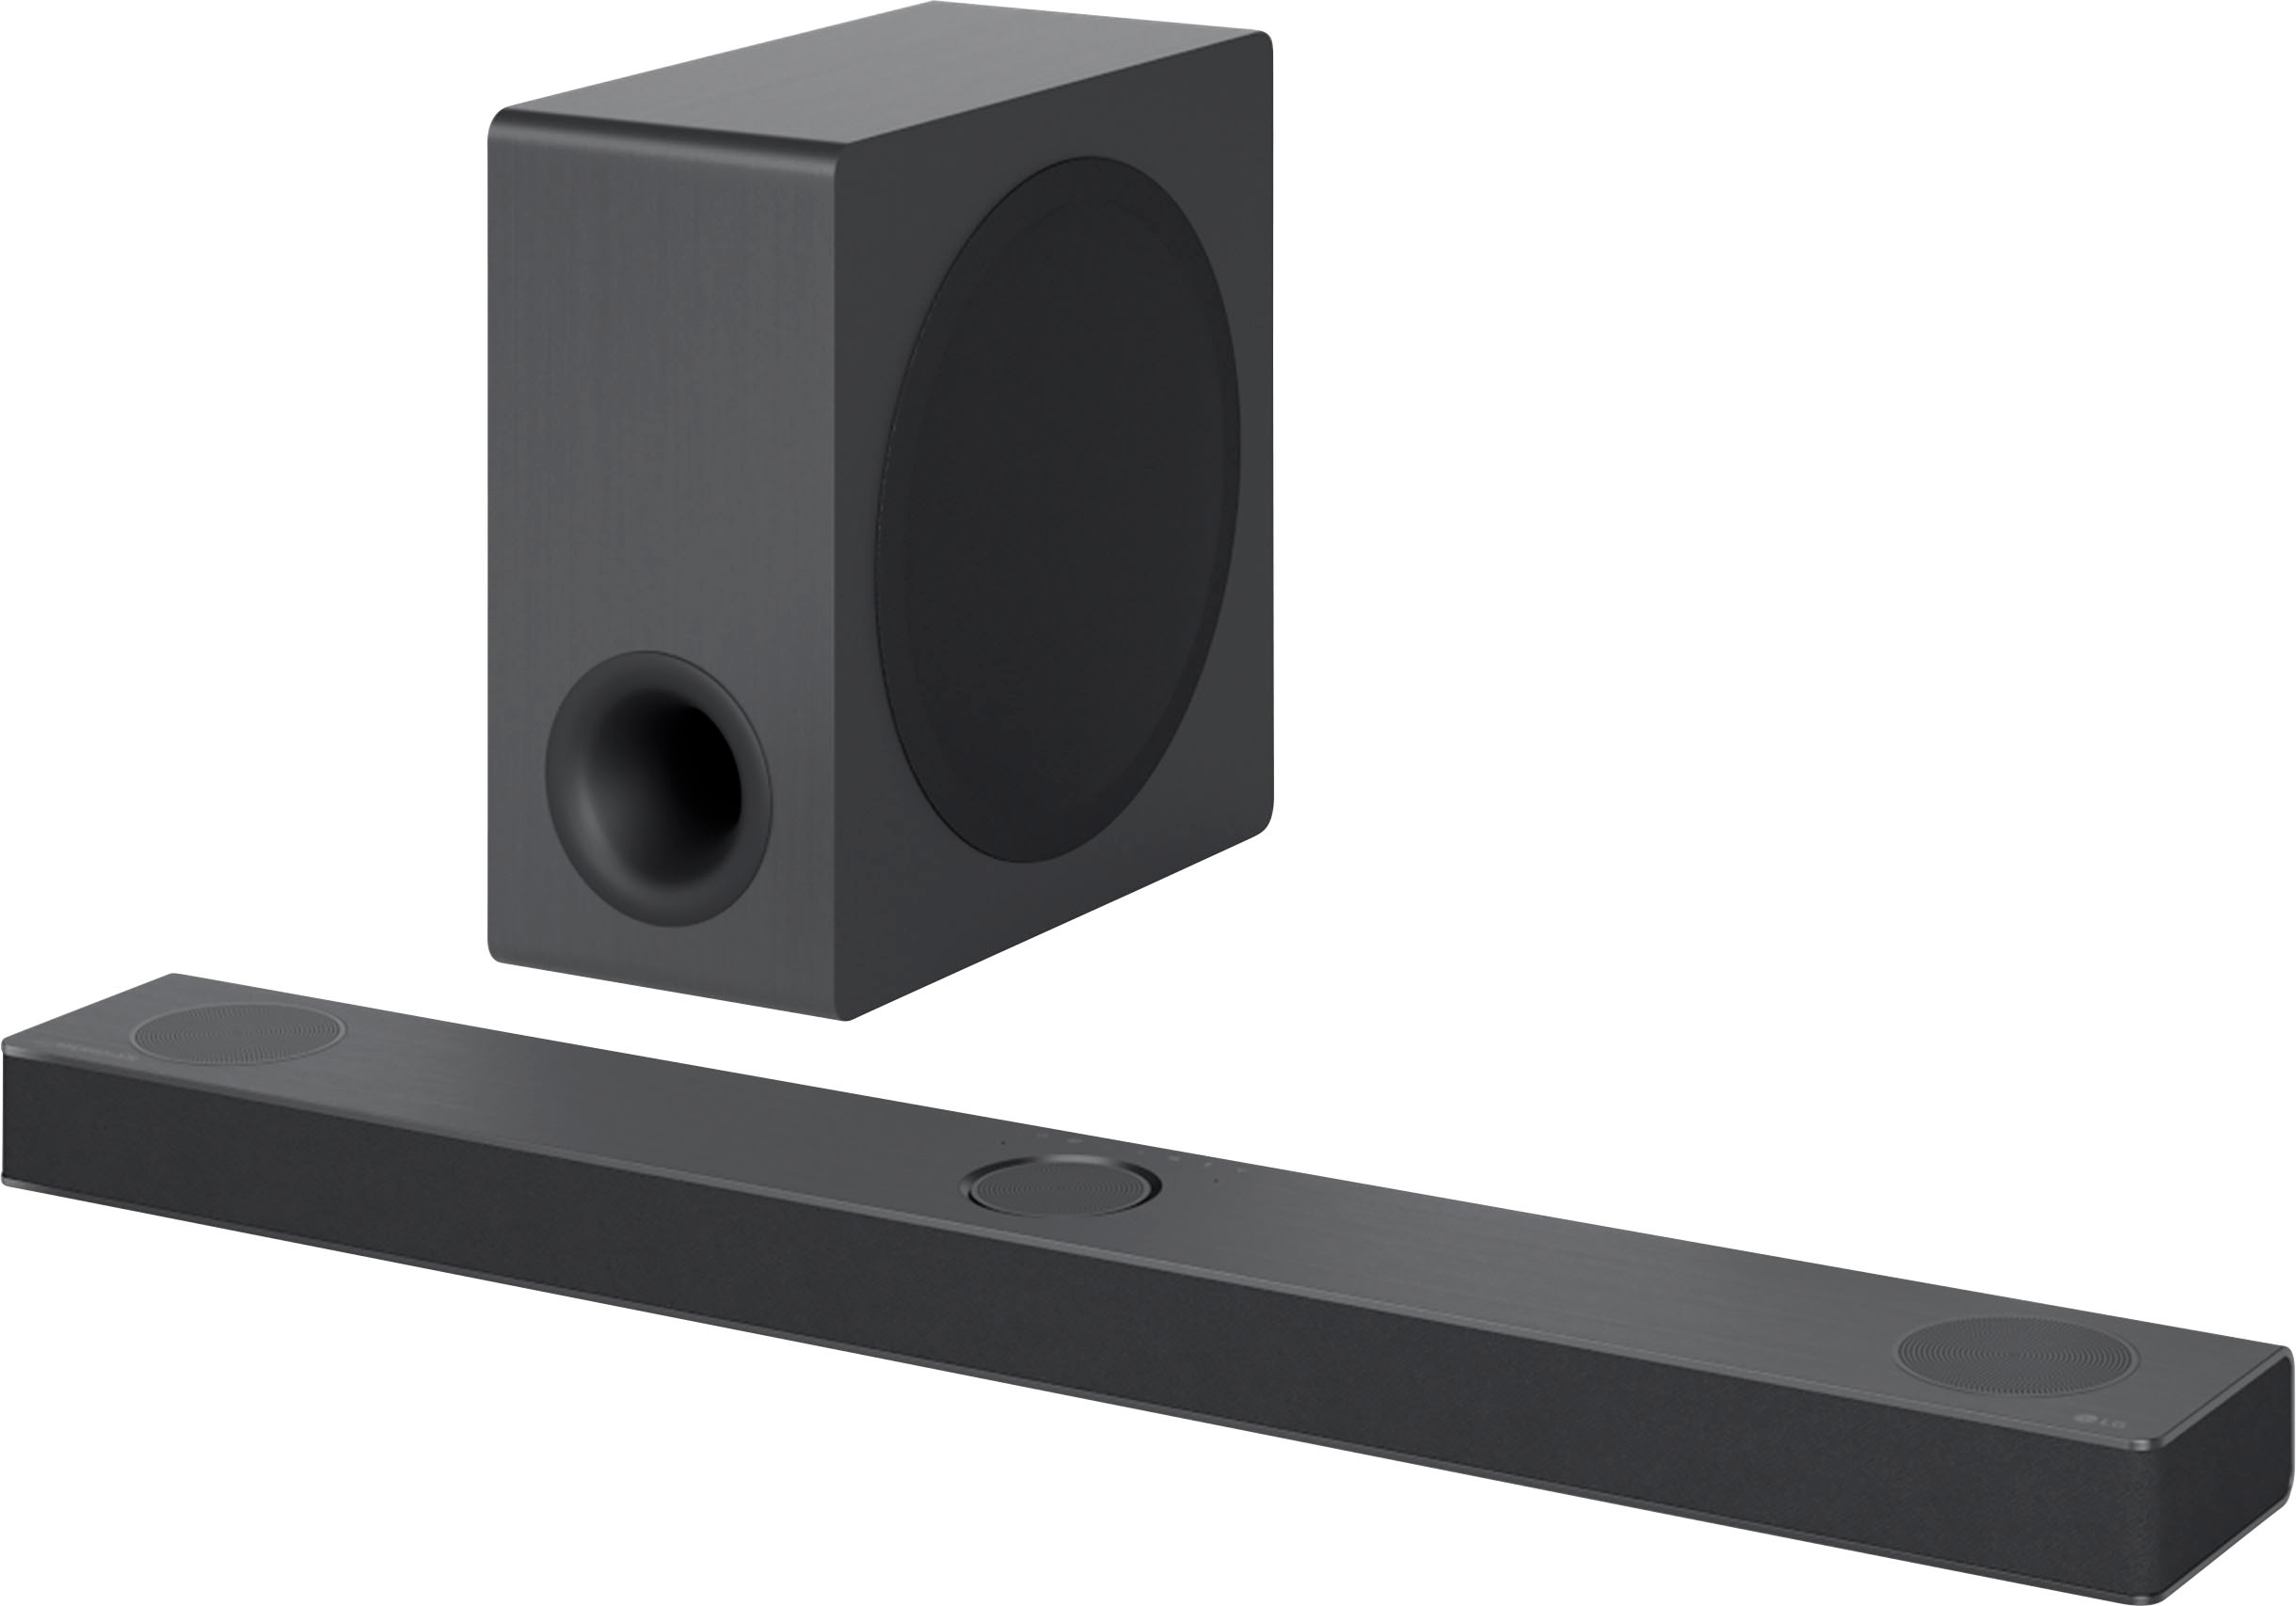 - Subwoofer, Best Soundbar Black and Wireless with S80QY LG Atmos DTS:X Dolby Buy Channel 3.1.3